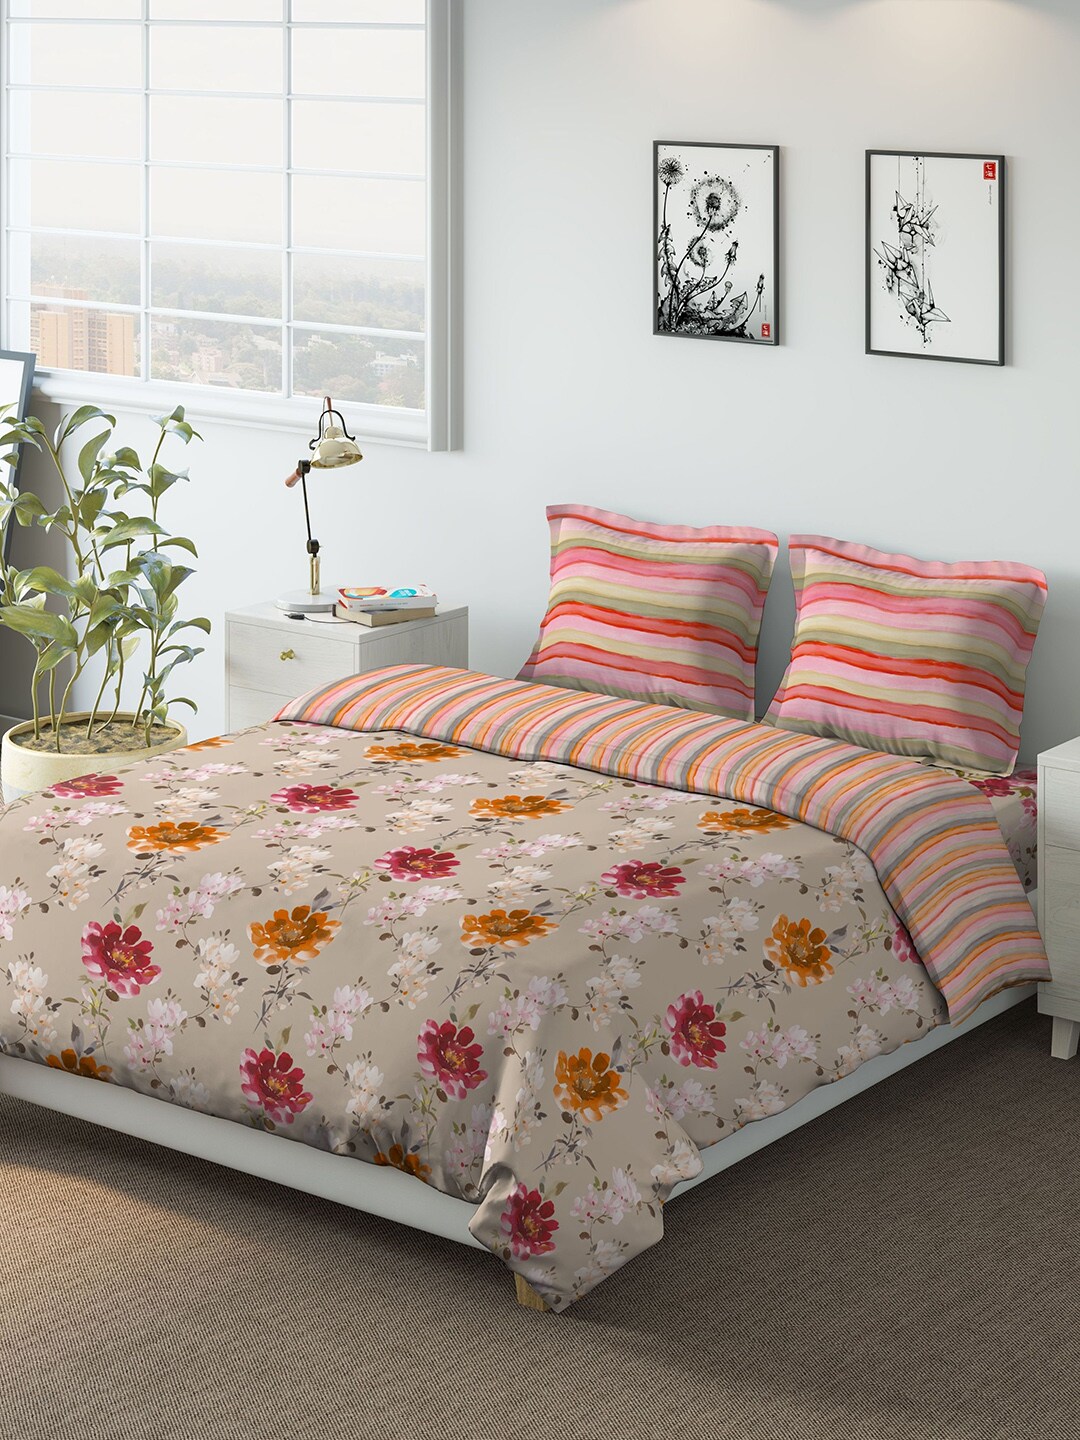 DDecor Multicoloured 150TC Printed Bedding Set with Comforter Price in India